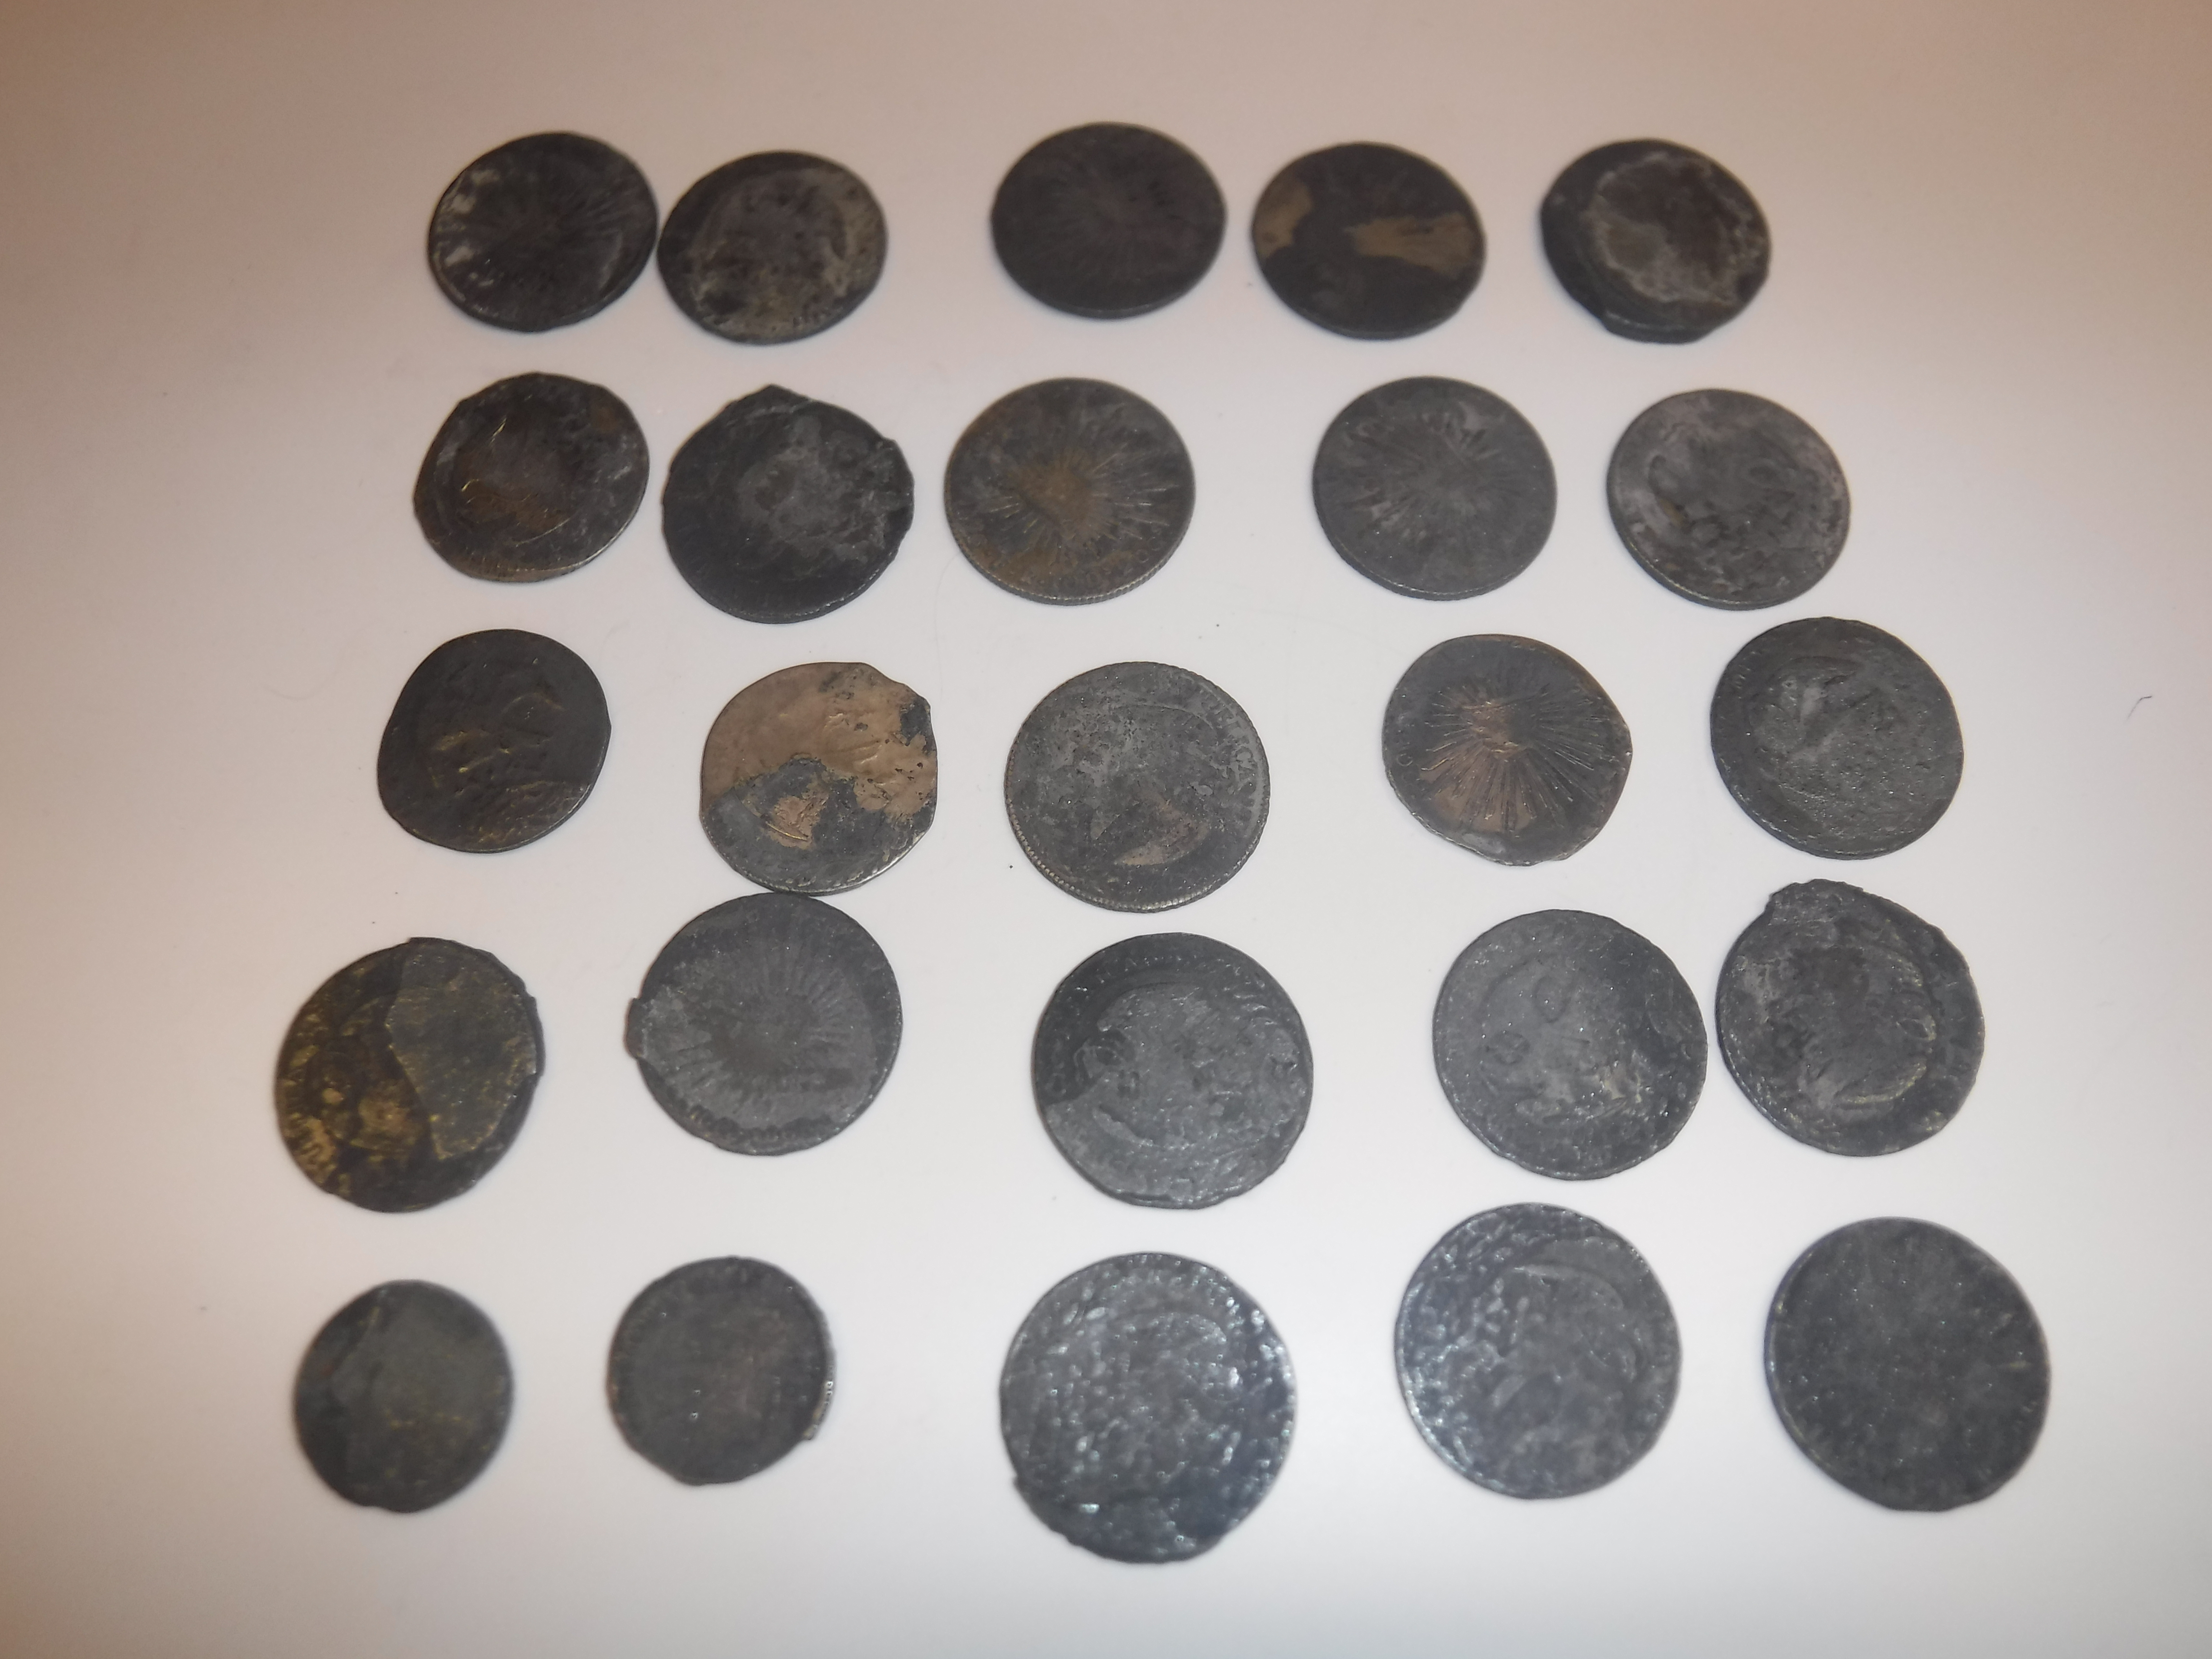 A collection of 25 Mexican silver 8 reale and other coins inscribed "Republica Mexicana" with eagle